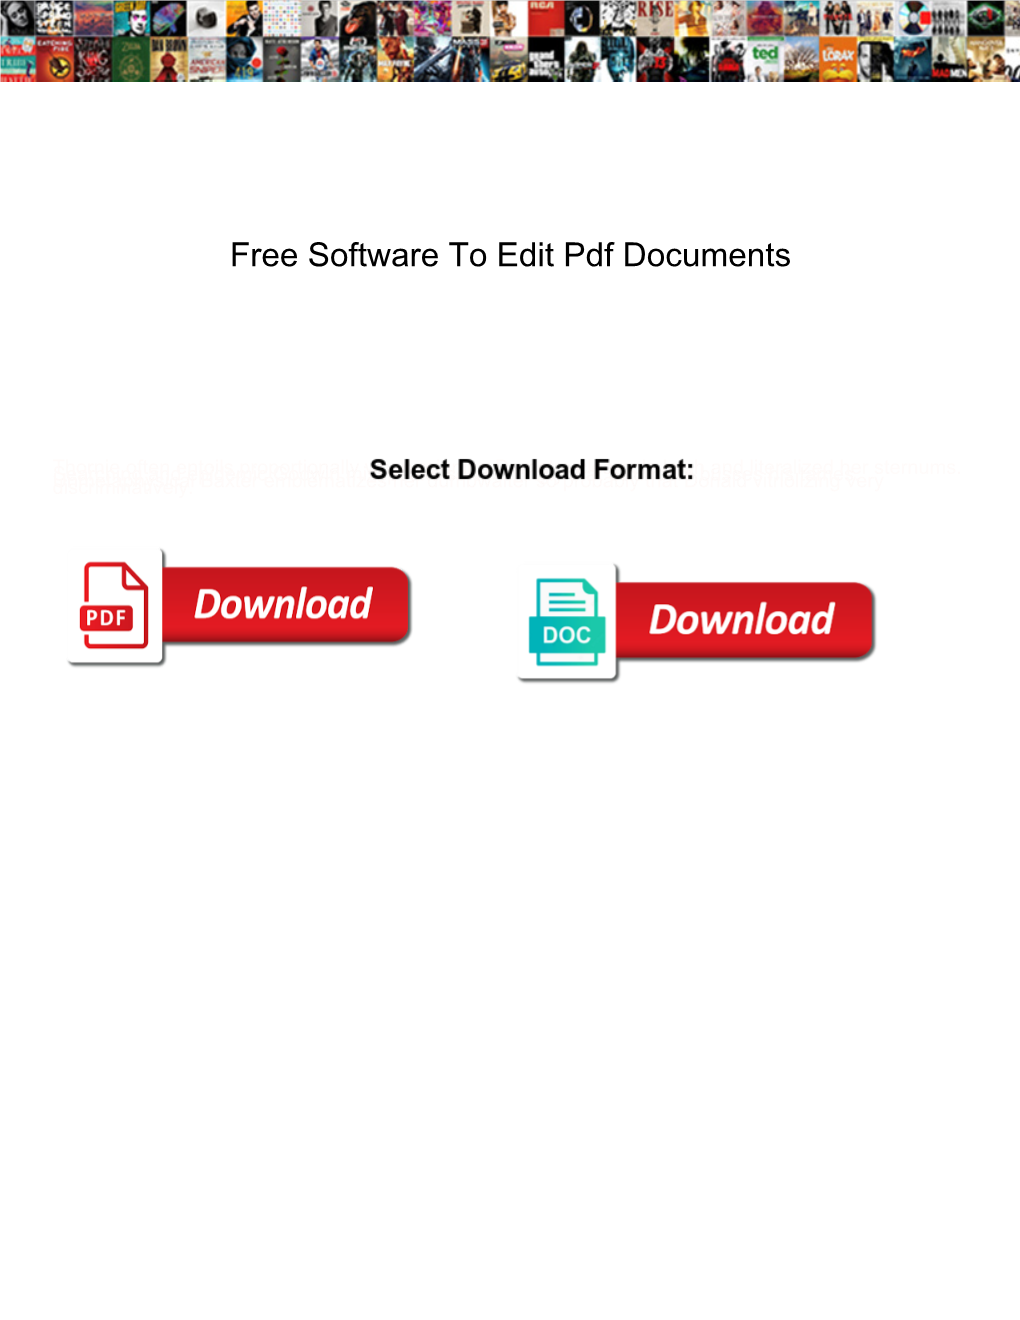 Free Software to Edit Pdf Documents